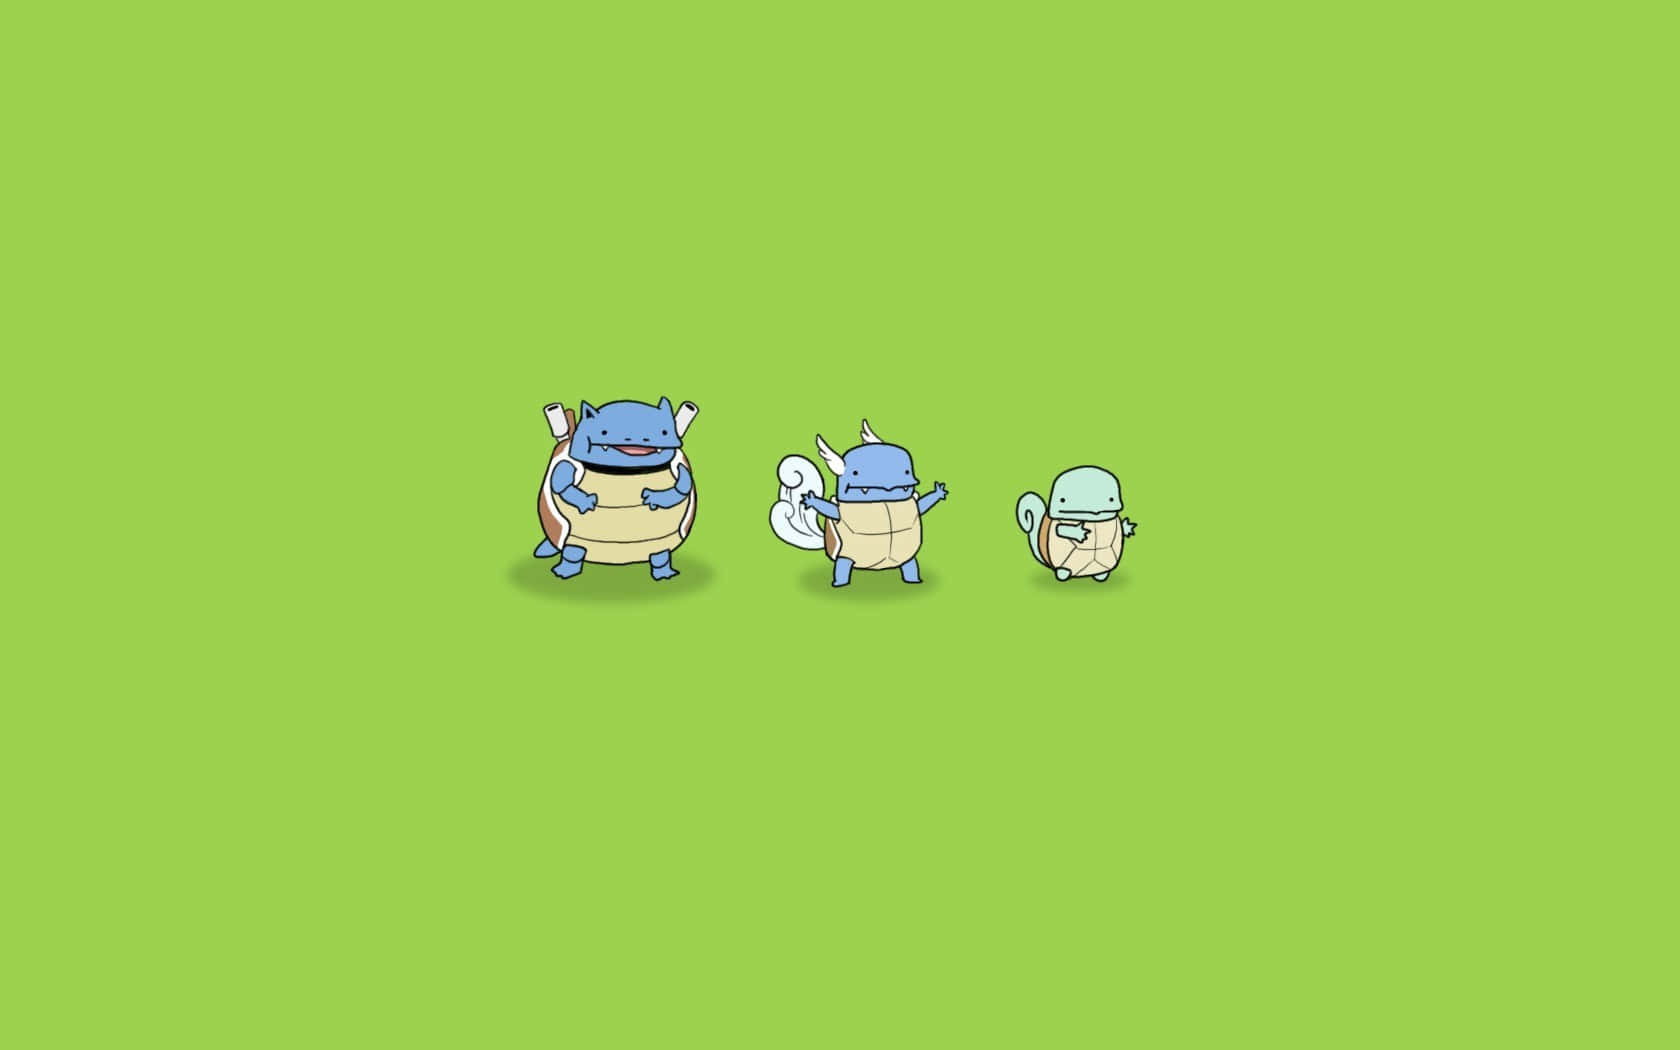 Cute Blastoise, Wartortle, And Squirtle Wallpaper